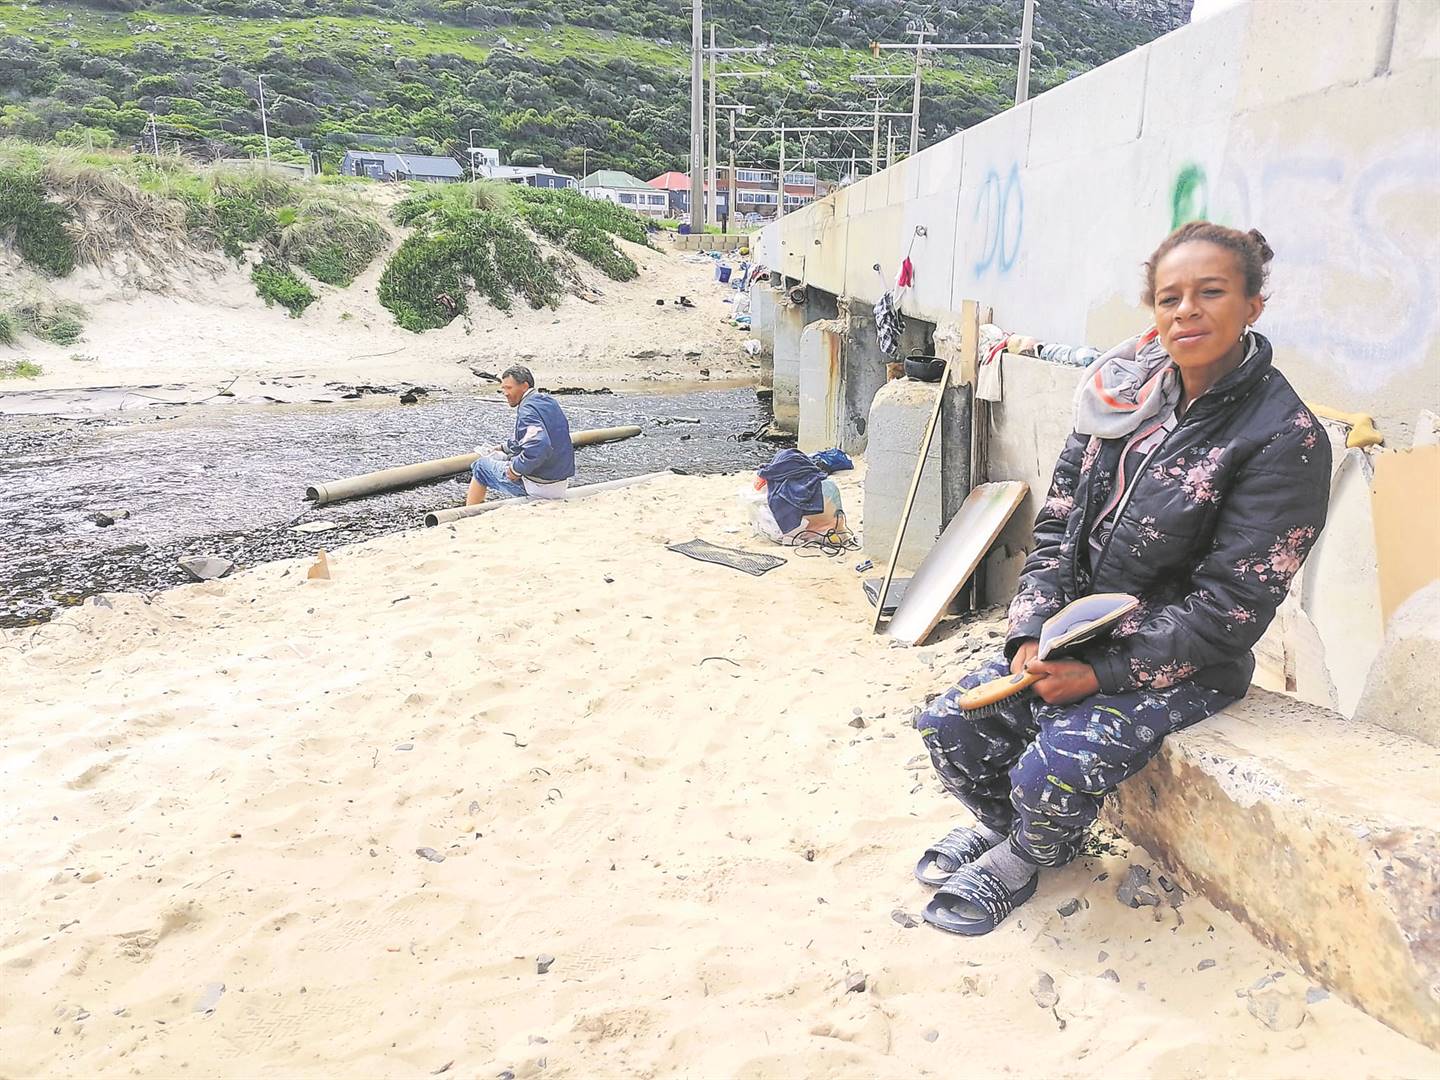 Mariana Osman from Ocean View has been living on the streets for the past two months. PHOTO: natasha bezuidenhout